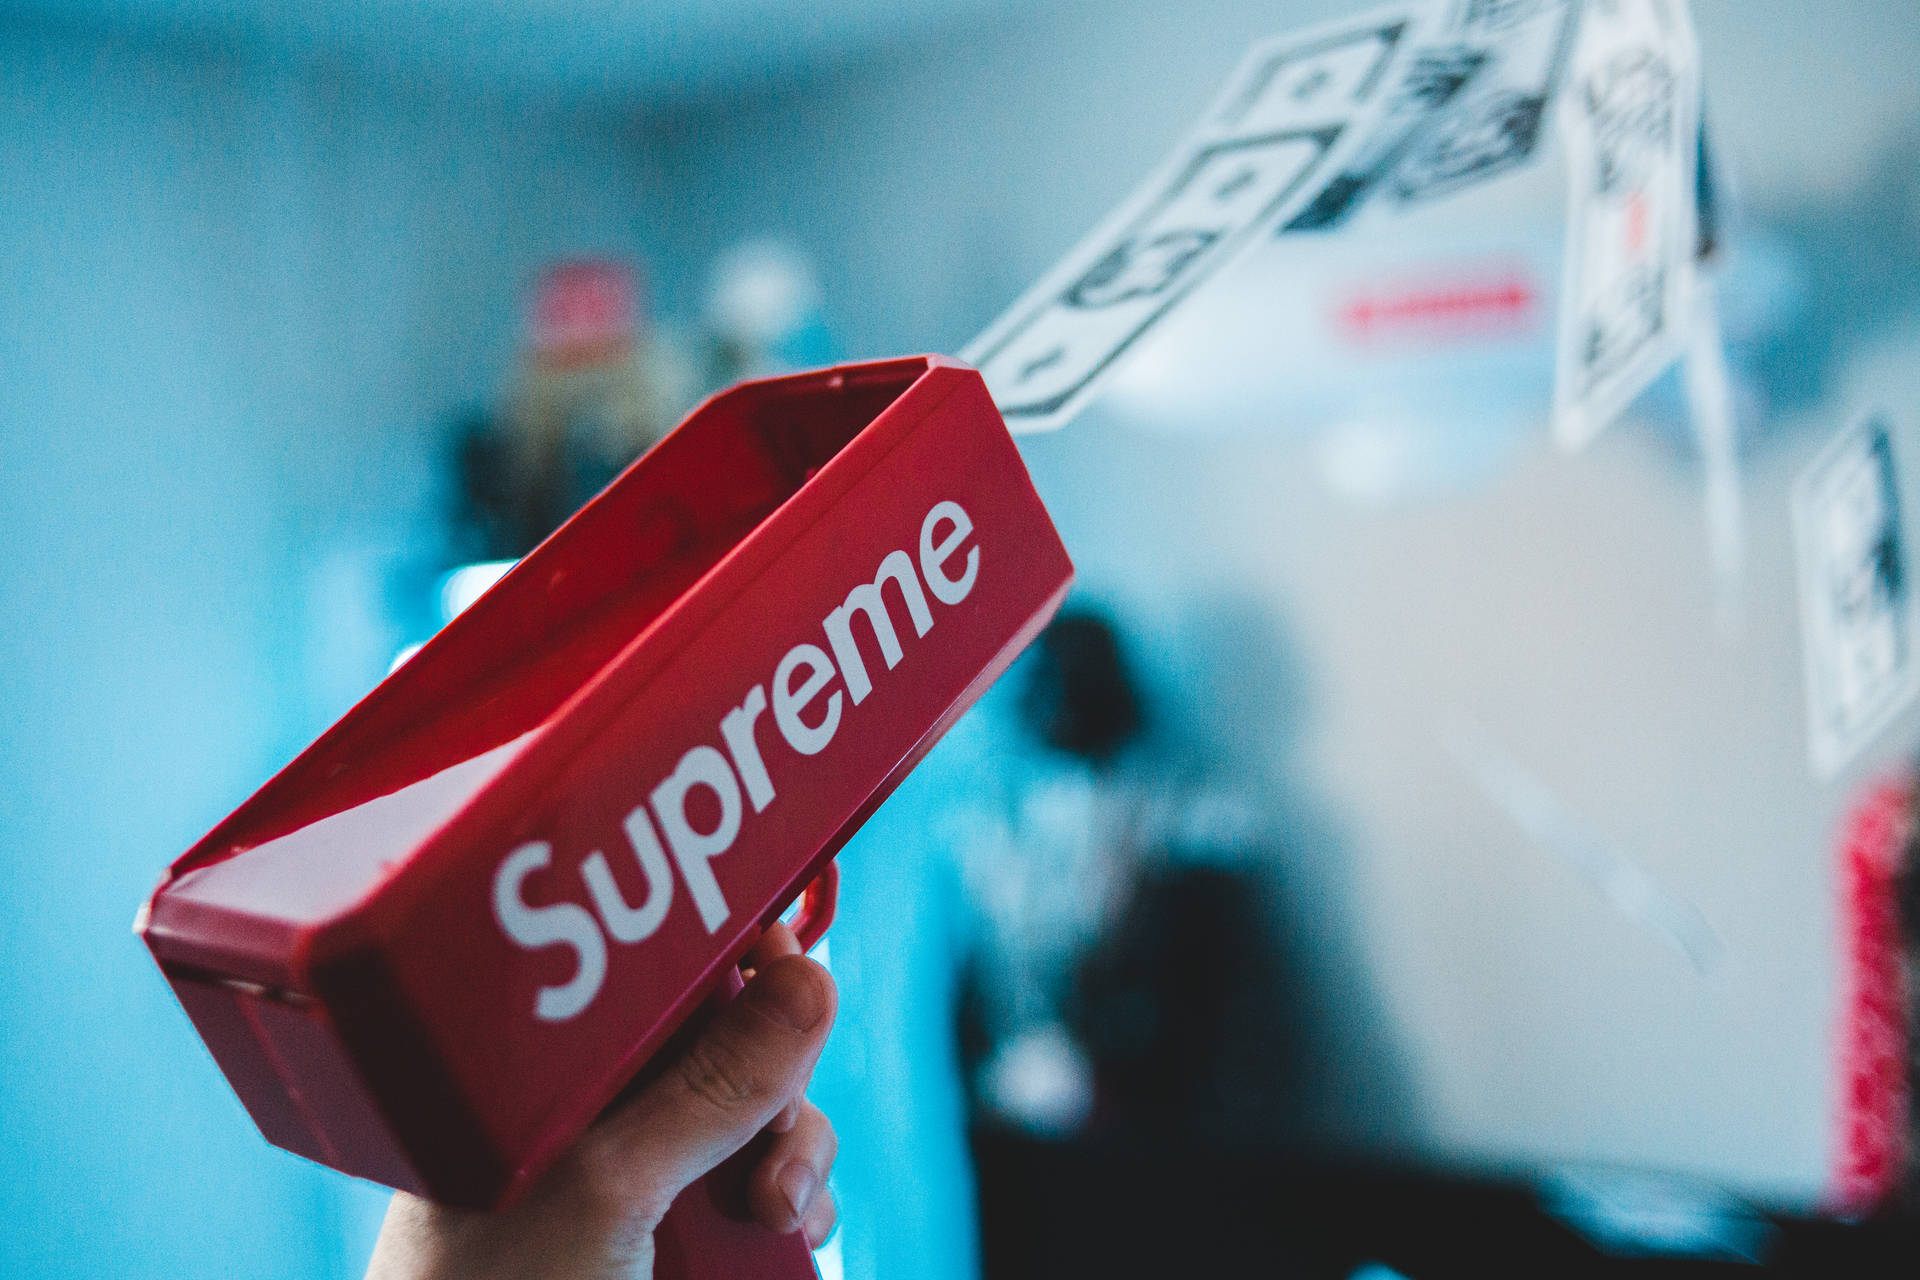 Supreme 5140X3427 Wallpaper and Background Image